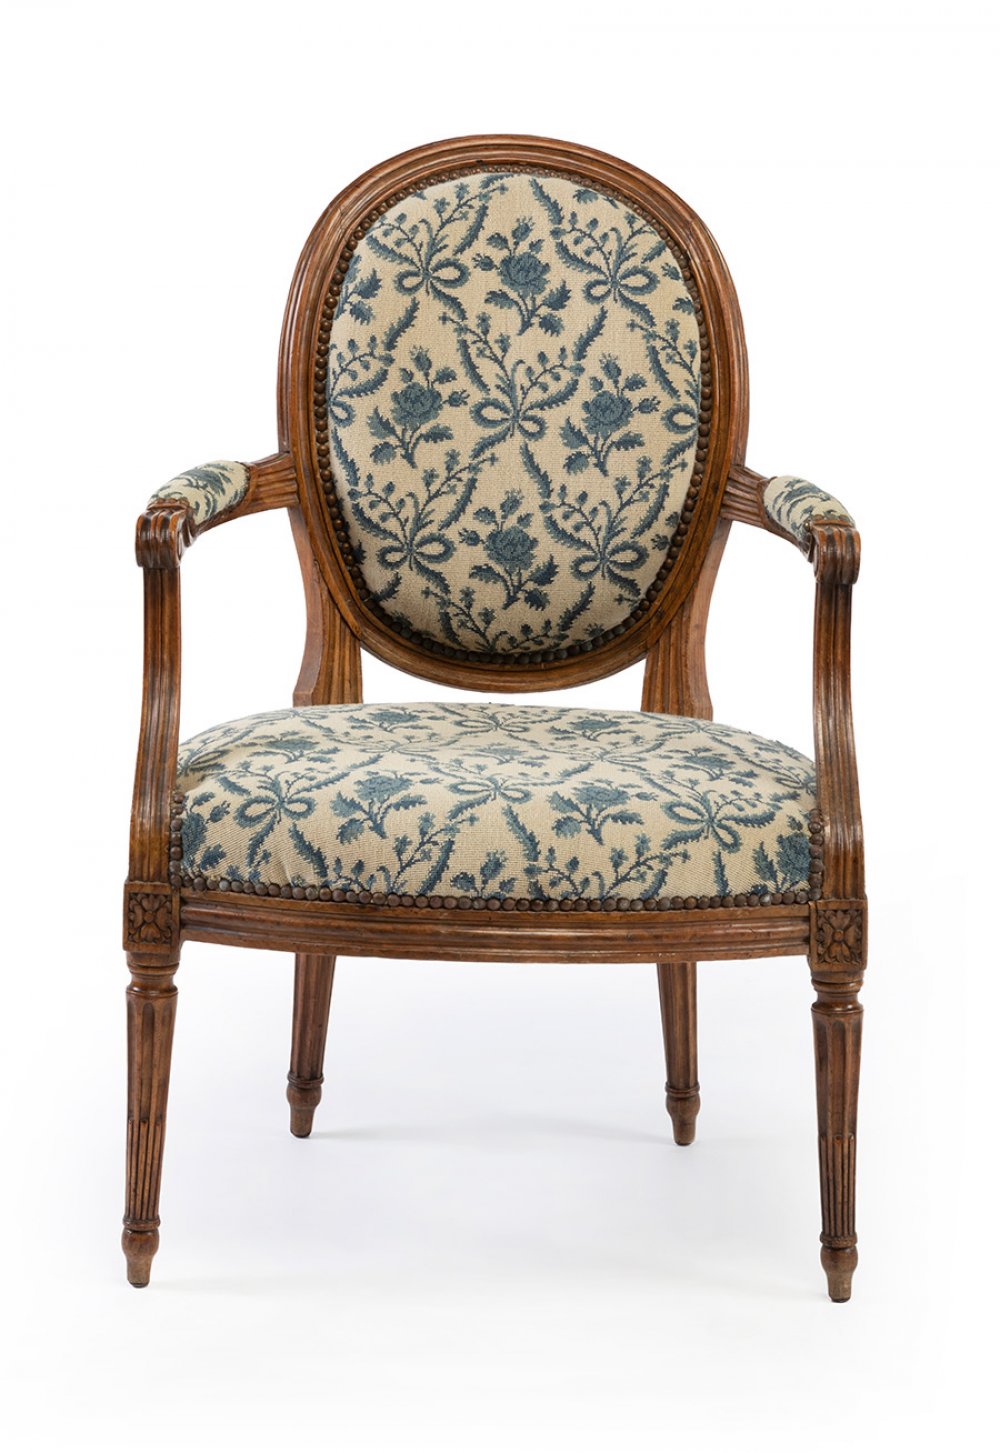 Set of six Louis XVI armchairs, second half of the eighteenth century.Walnut wood. Upholstery with - Image 5 of 7